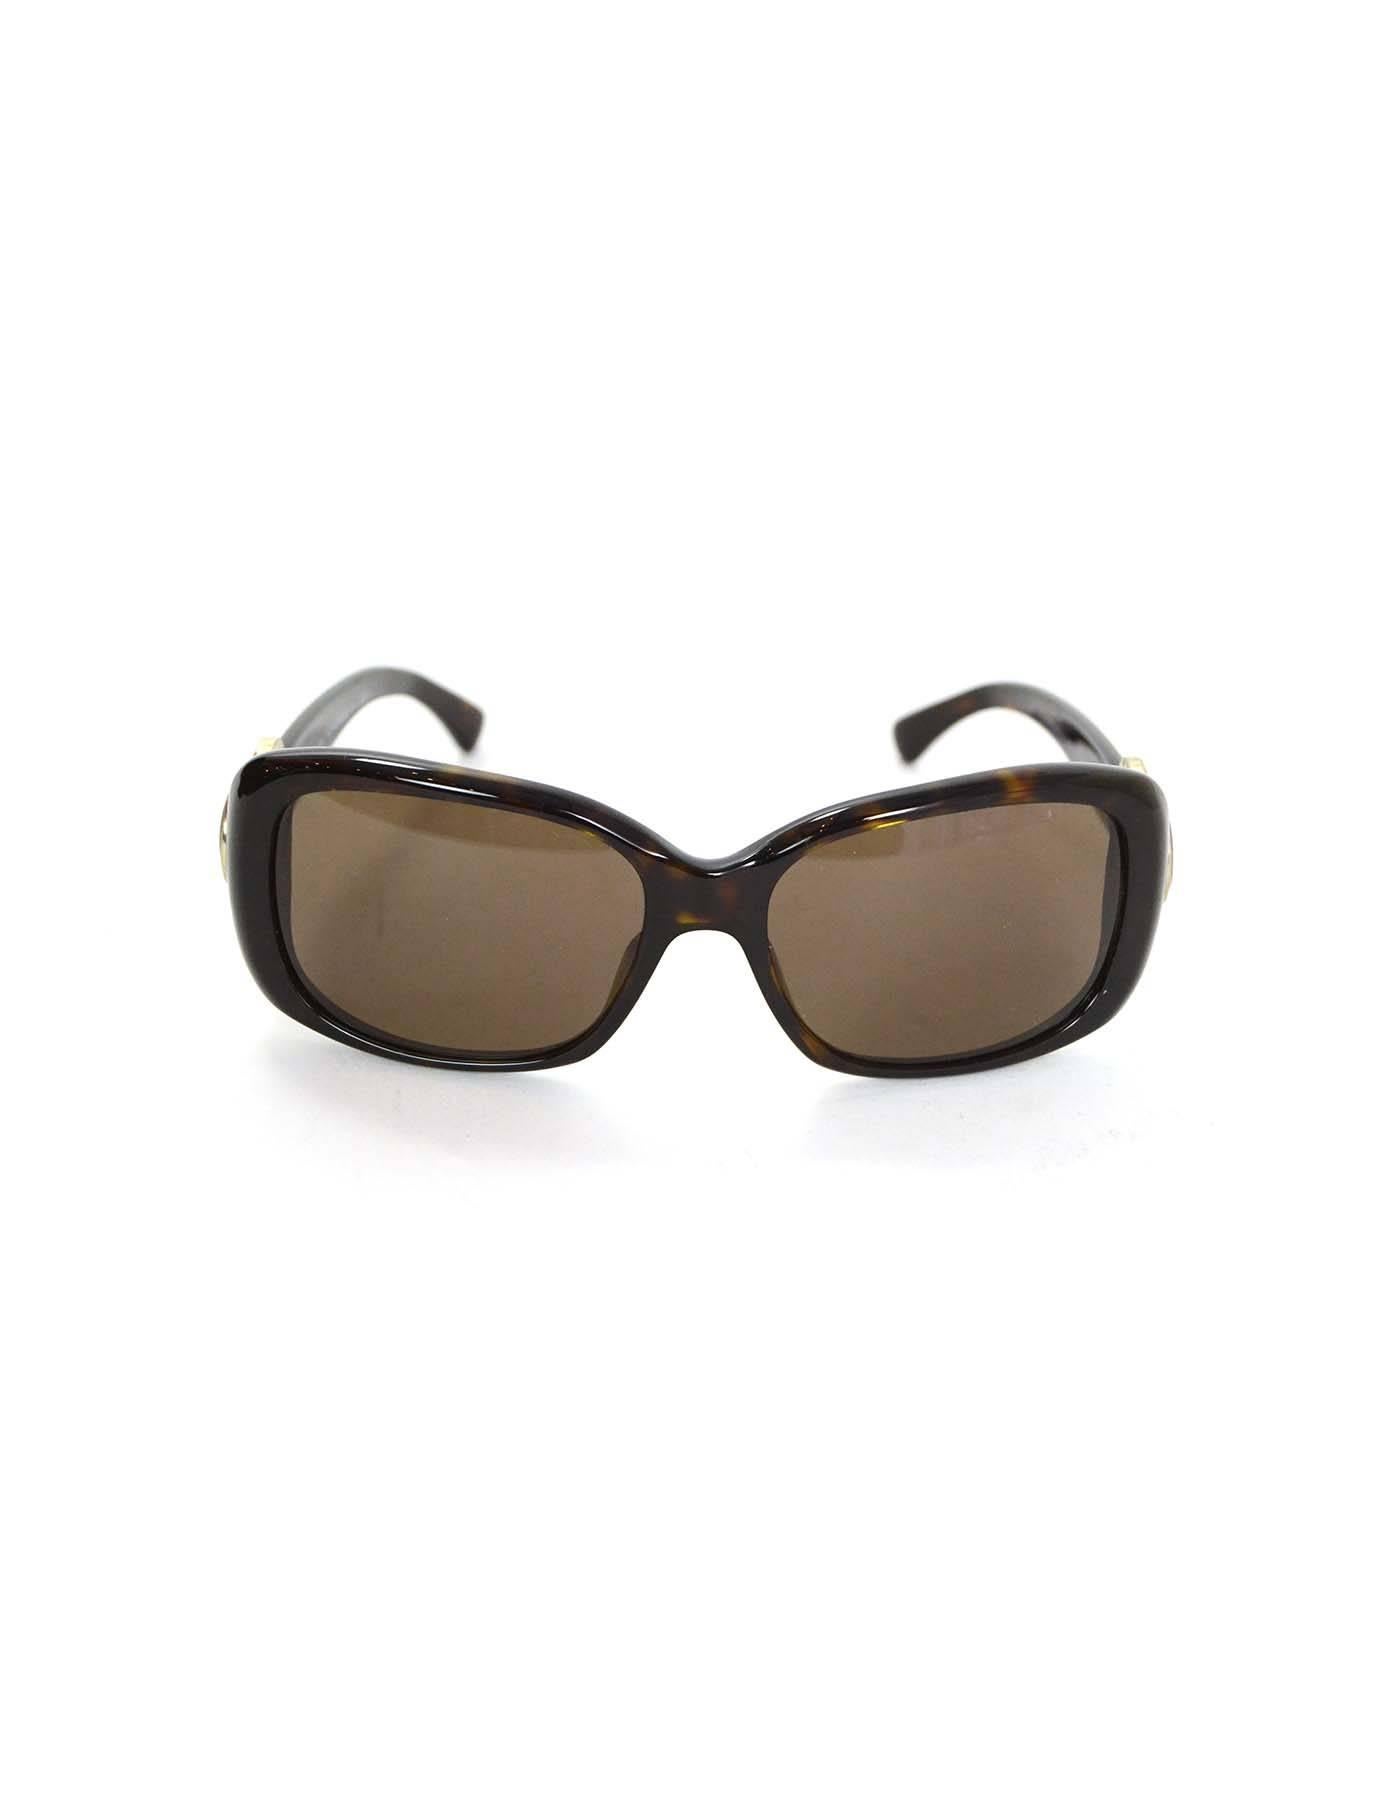 Chanel Tortoise Bouton Sunglasses with Enamel Circles

Features CC logo at sides

Made In: Italy
Color: Brown and lavender
Materials: Resin and enamel
Retail Price: $350 + tax
Overall Condition: Excellent pre-owned condition with the